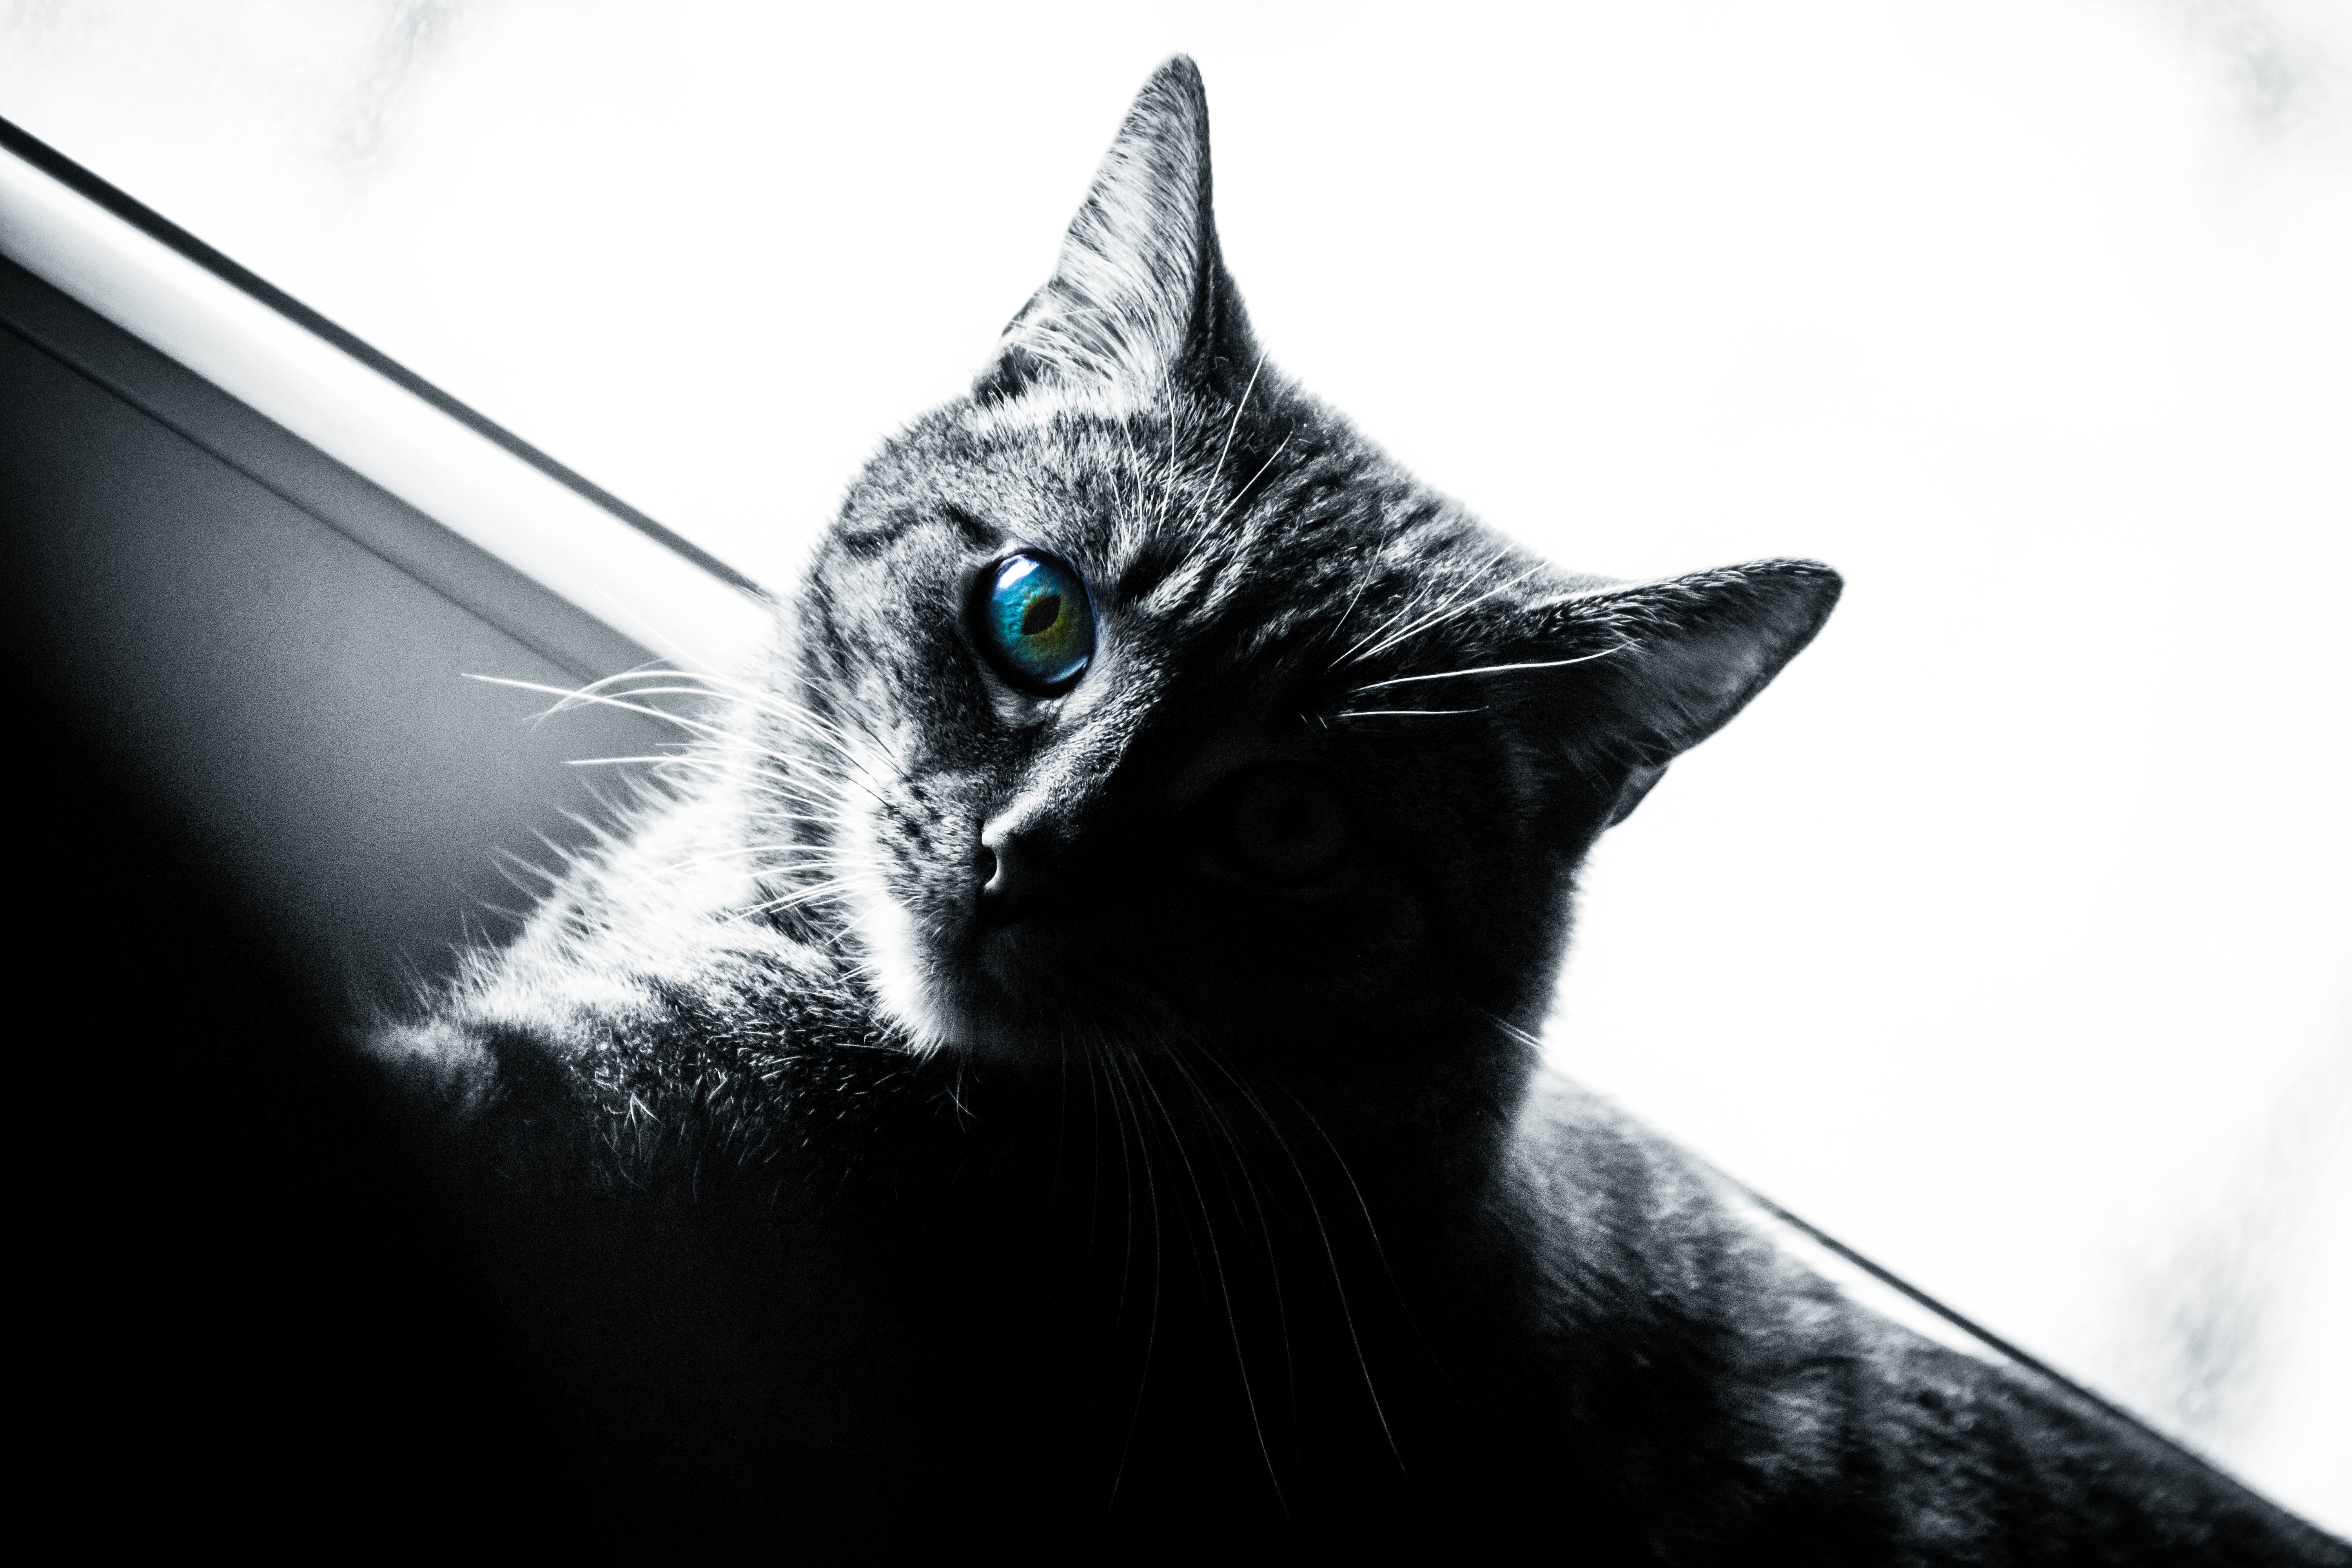 Monochrome photo of a cat with blue eyes